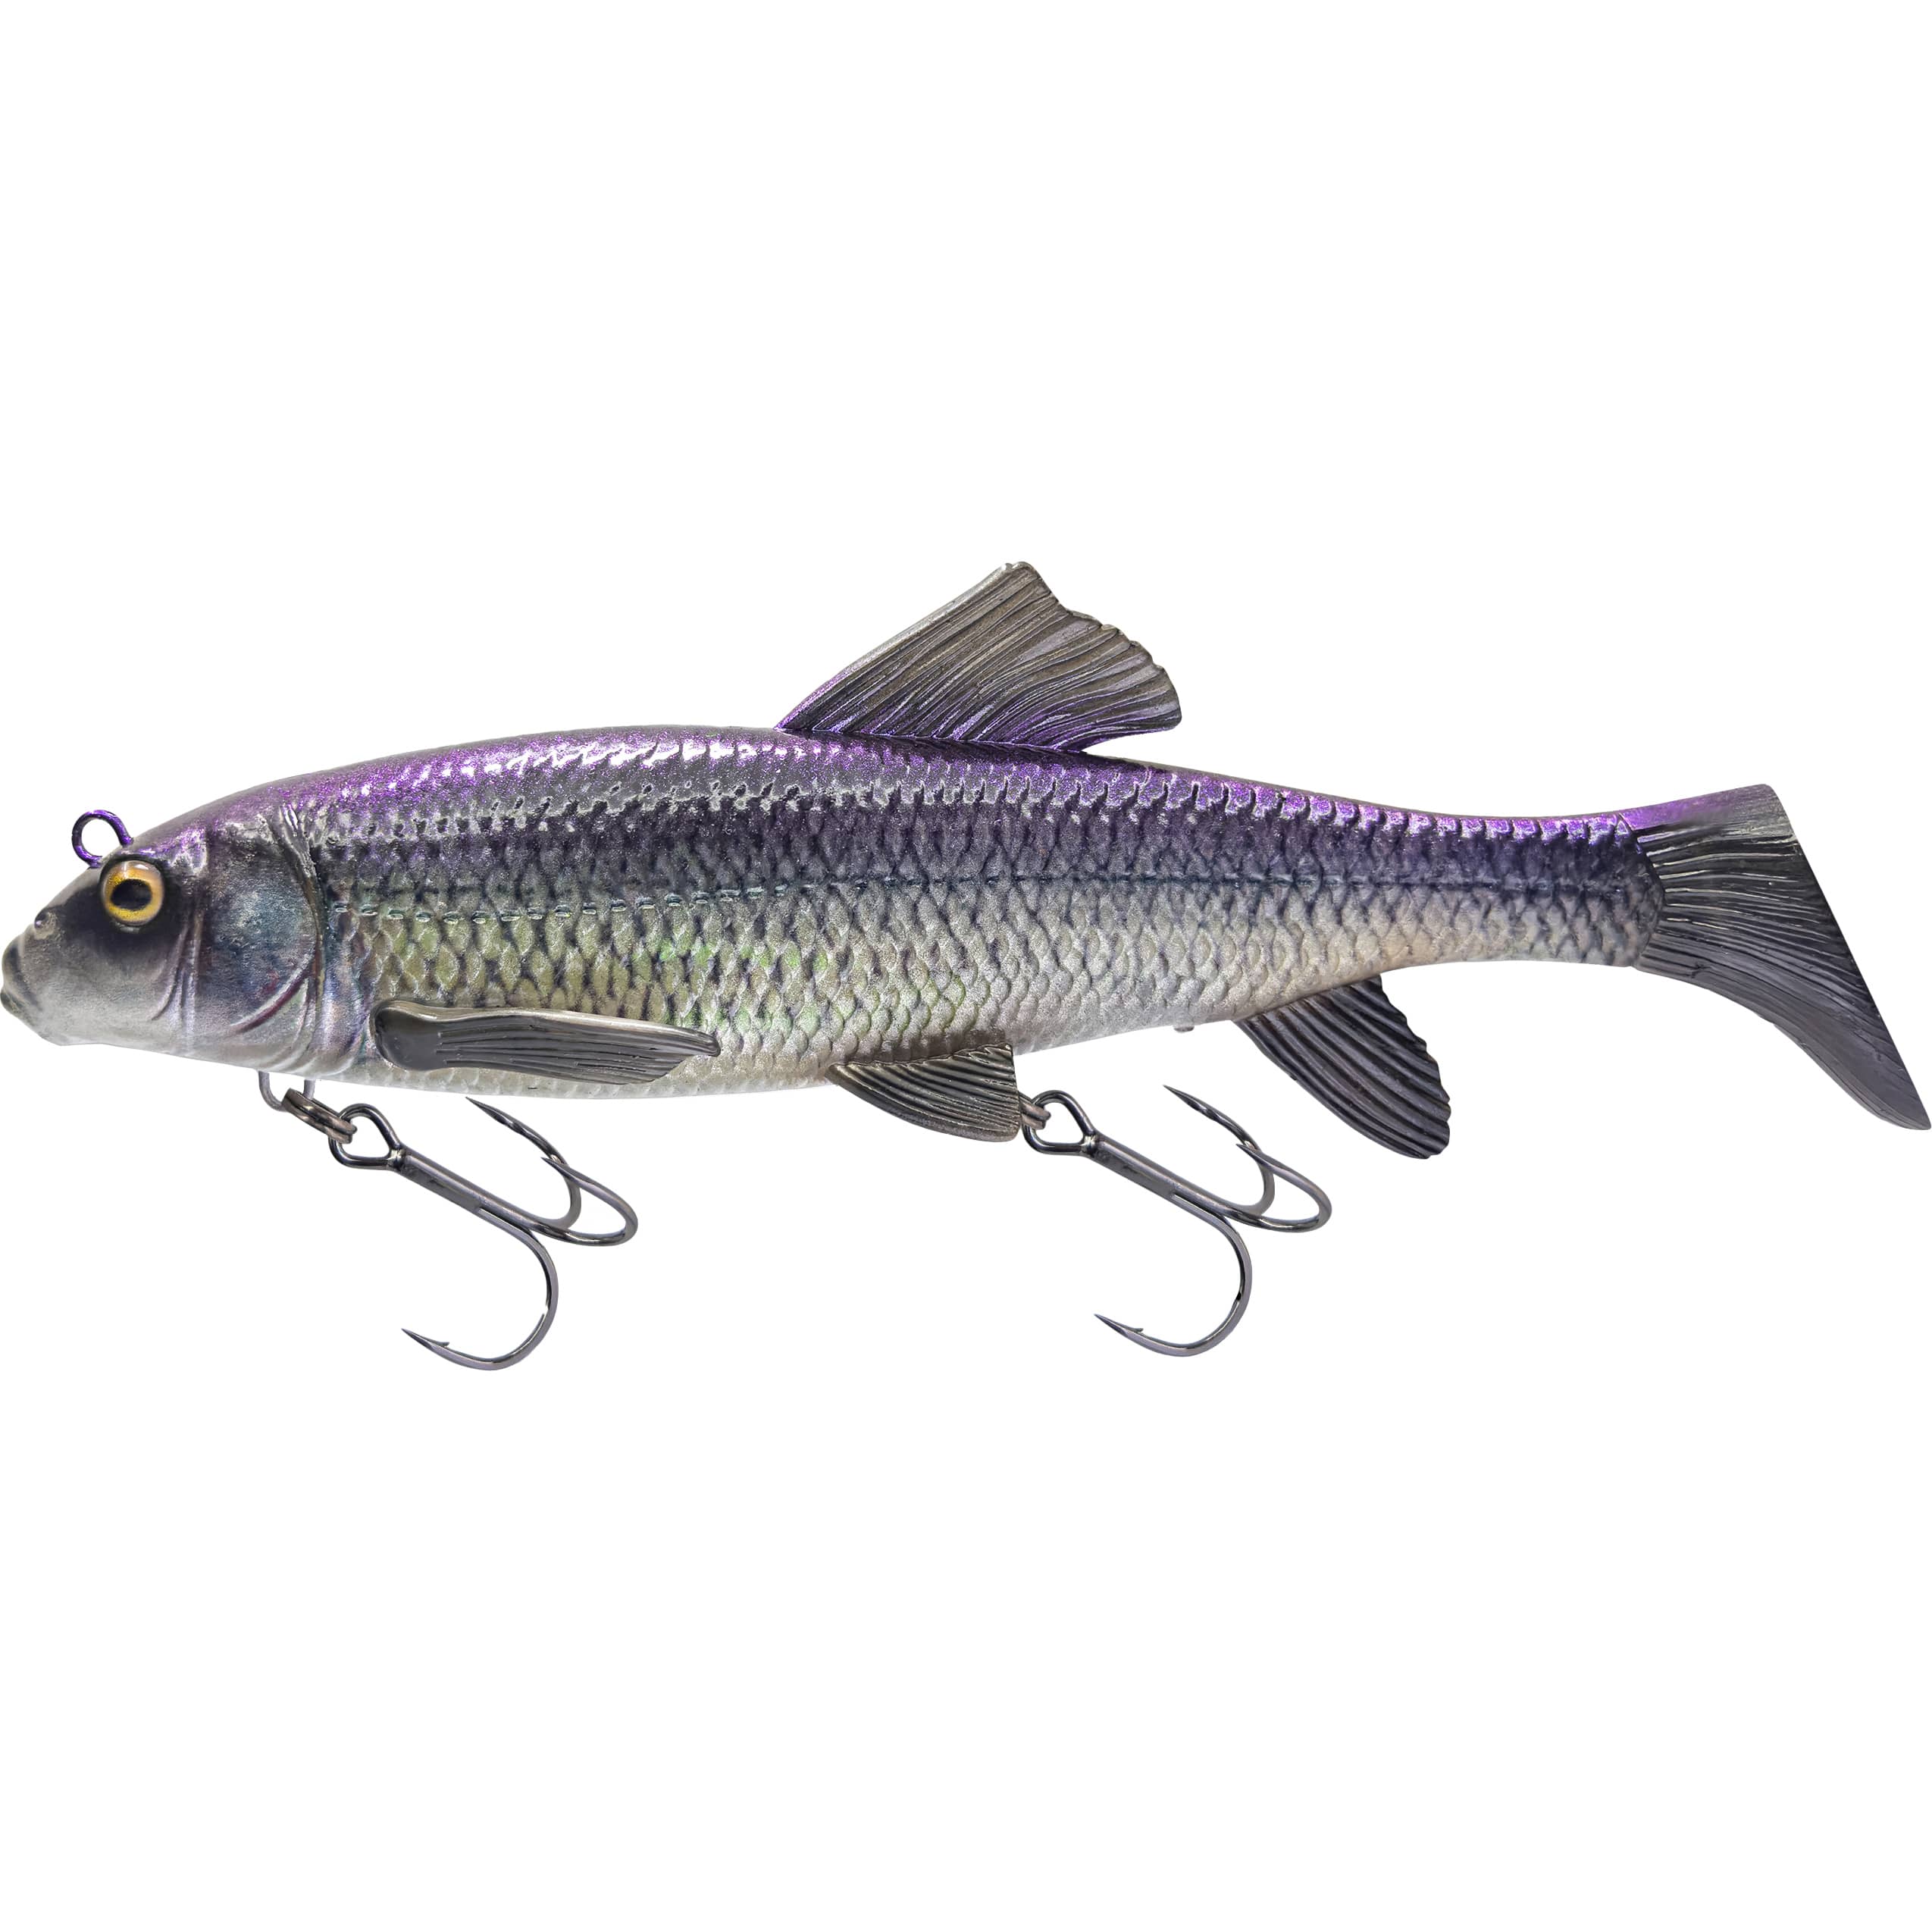 【Clearance Sale】6.4g/11.9g Fishing Lures With Propeller Tail Long-casting  Artificial Hard Bait For Bass Catfish Pike Perch